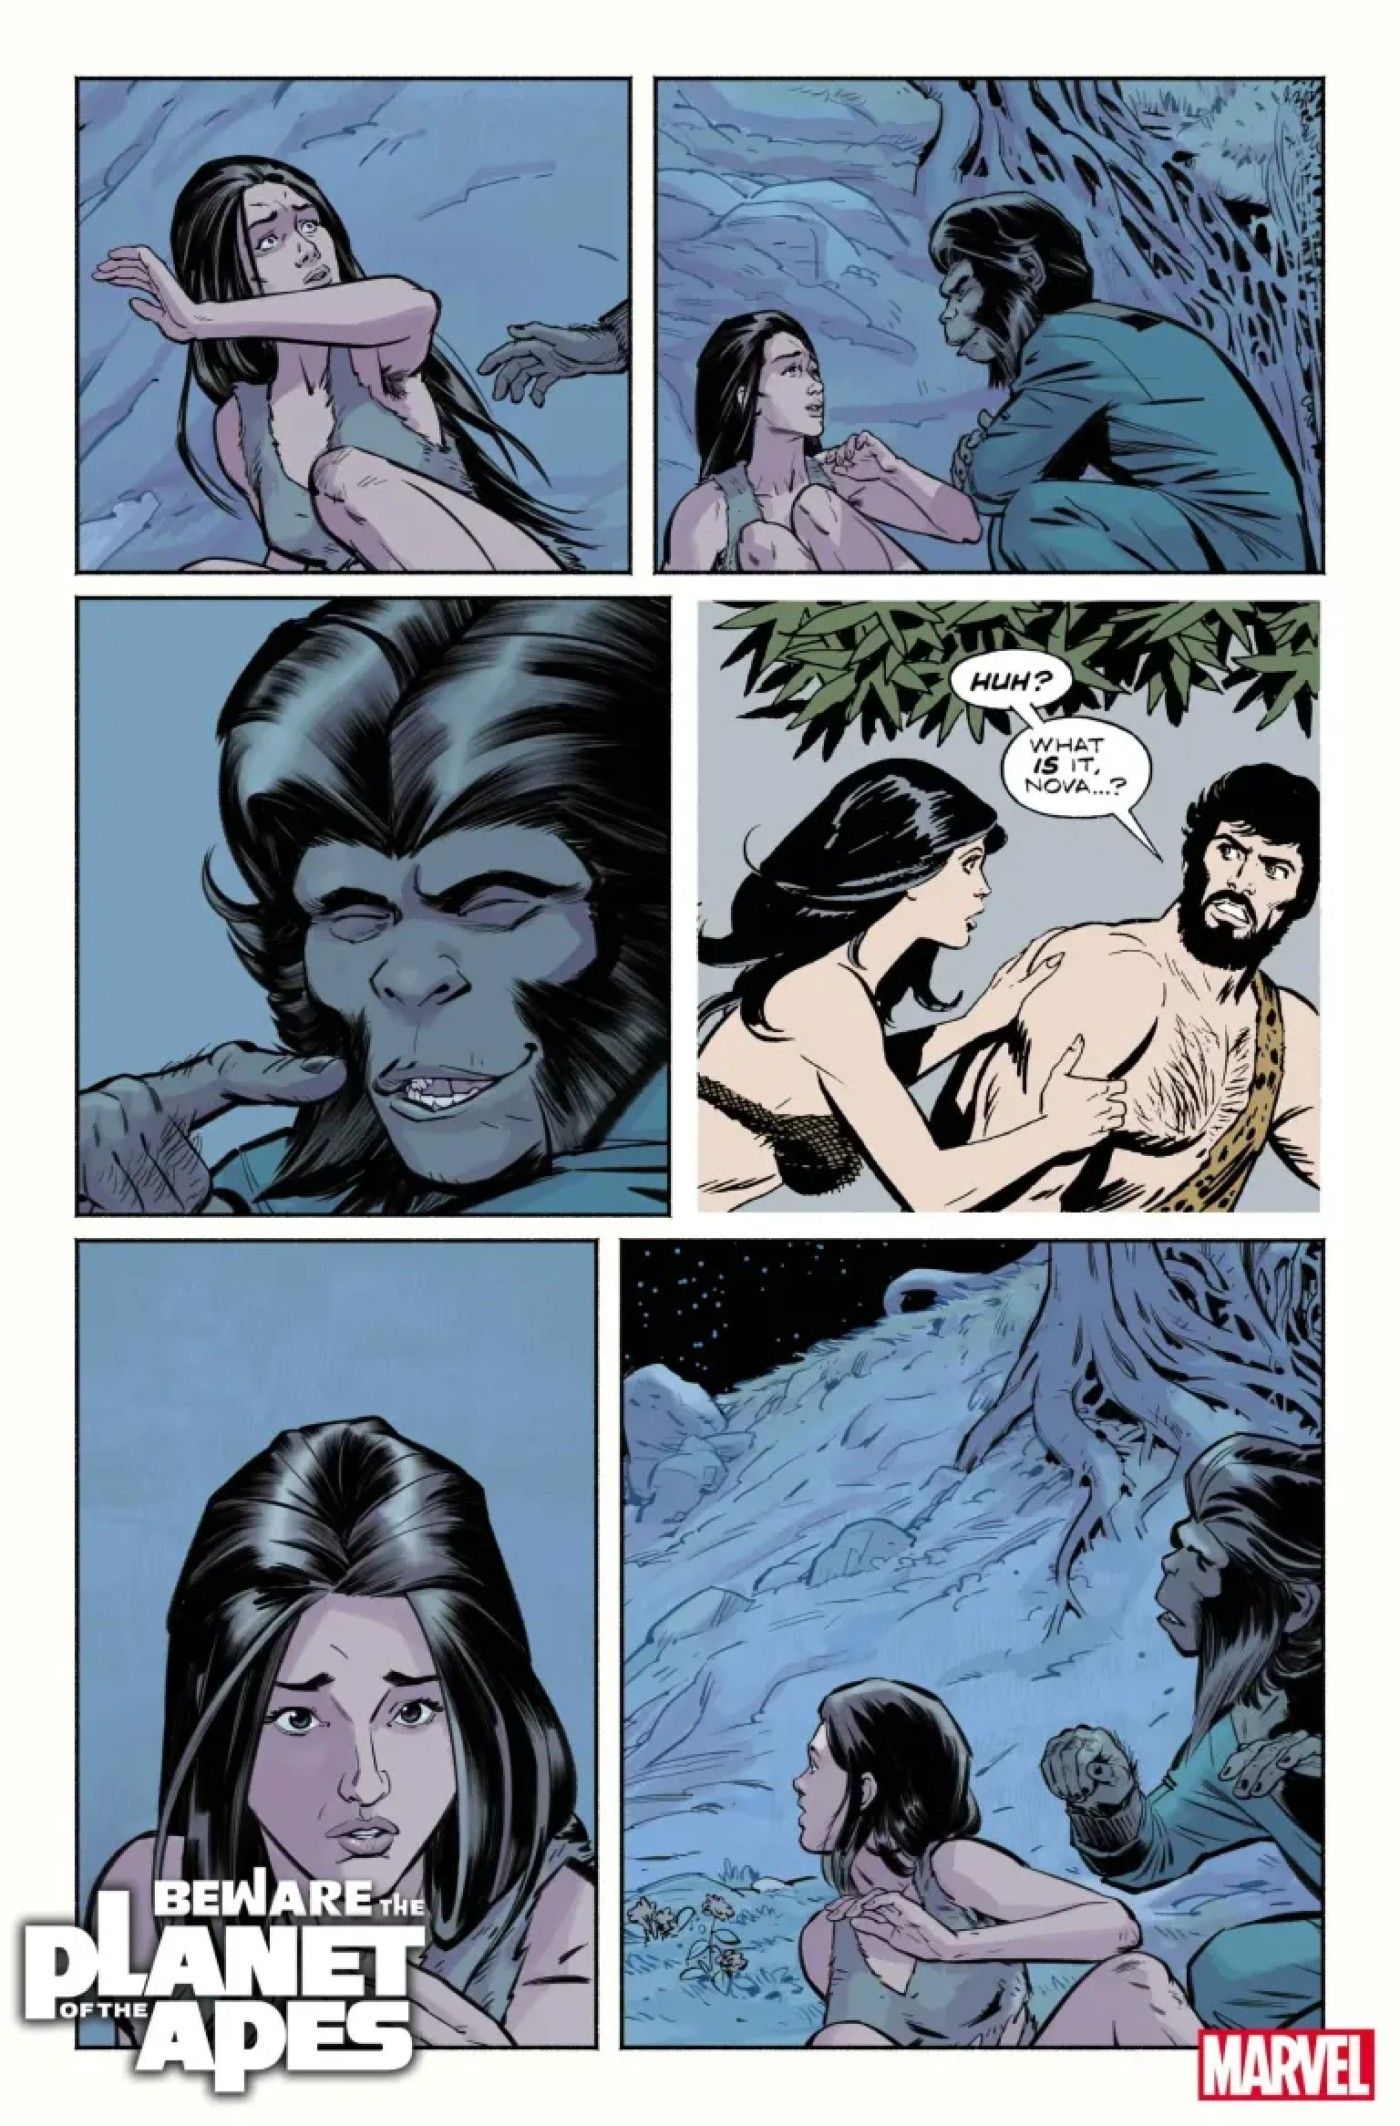 BEWARE THE PLANET OF THE APES 1 PREVIEW PAGE 2